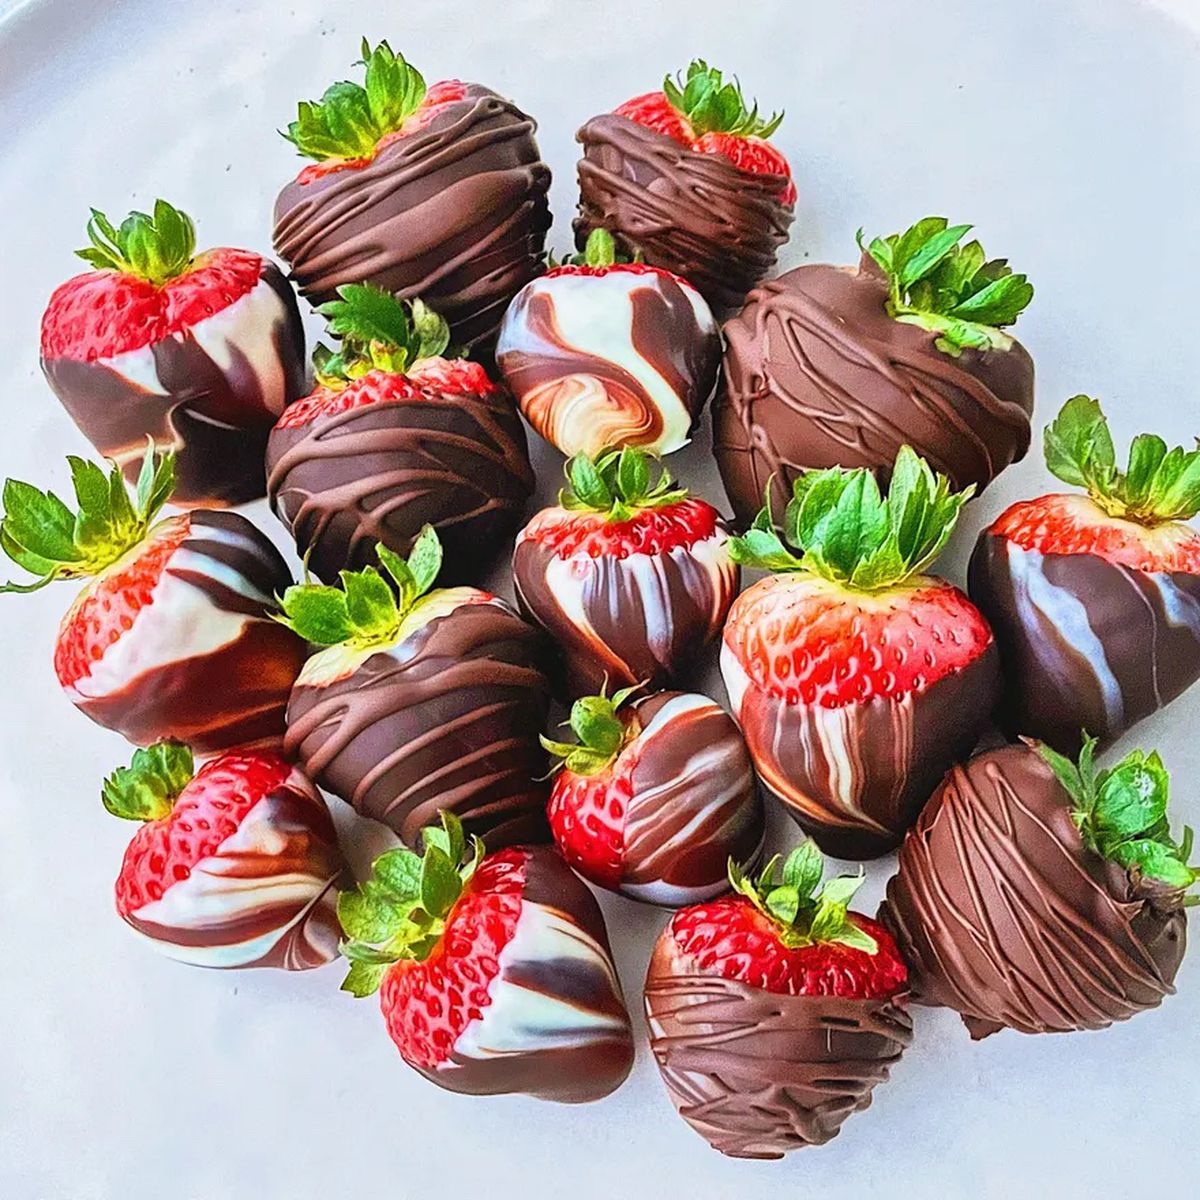 How To Store Chocolate Covered Strawberries Overnight